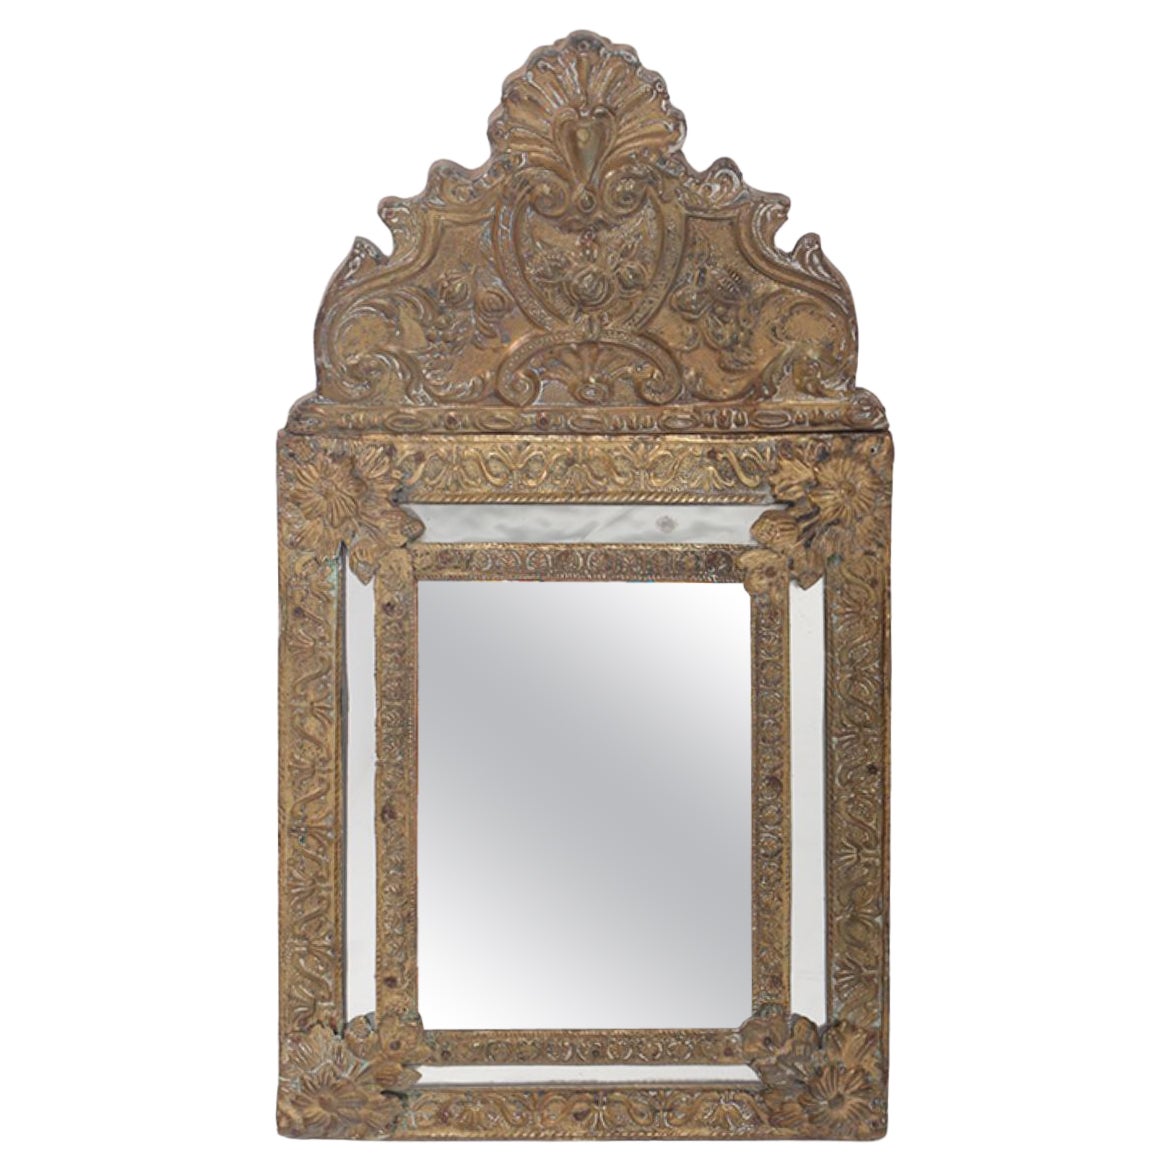 A small Dutch style brass repouse mirror circa 1890. For Sale